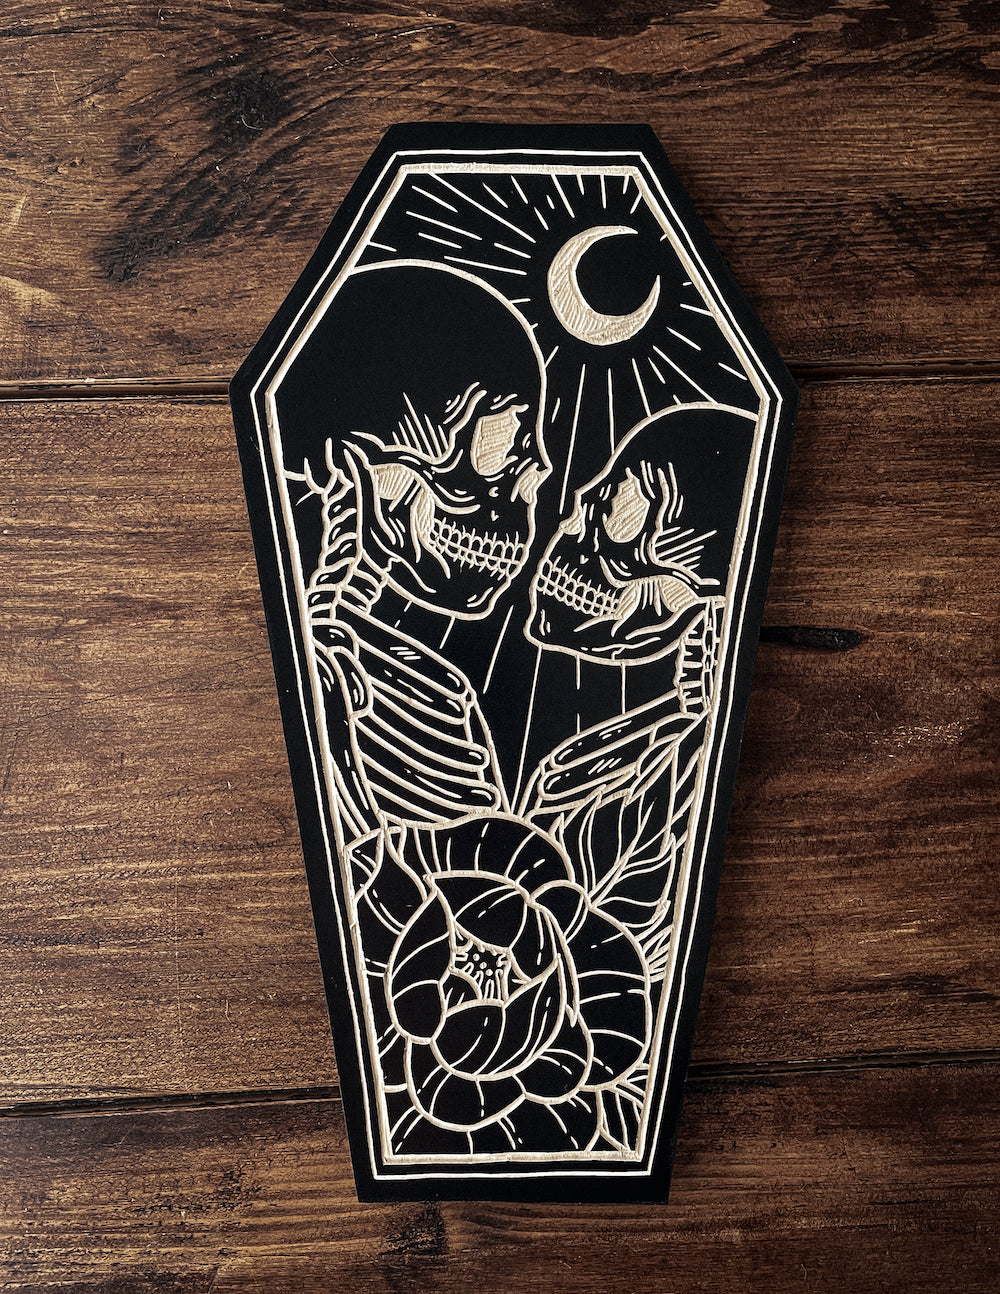 Lovers coffin